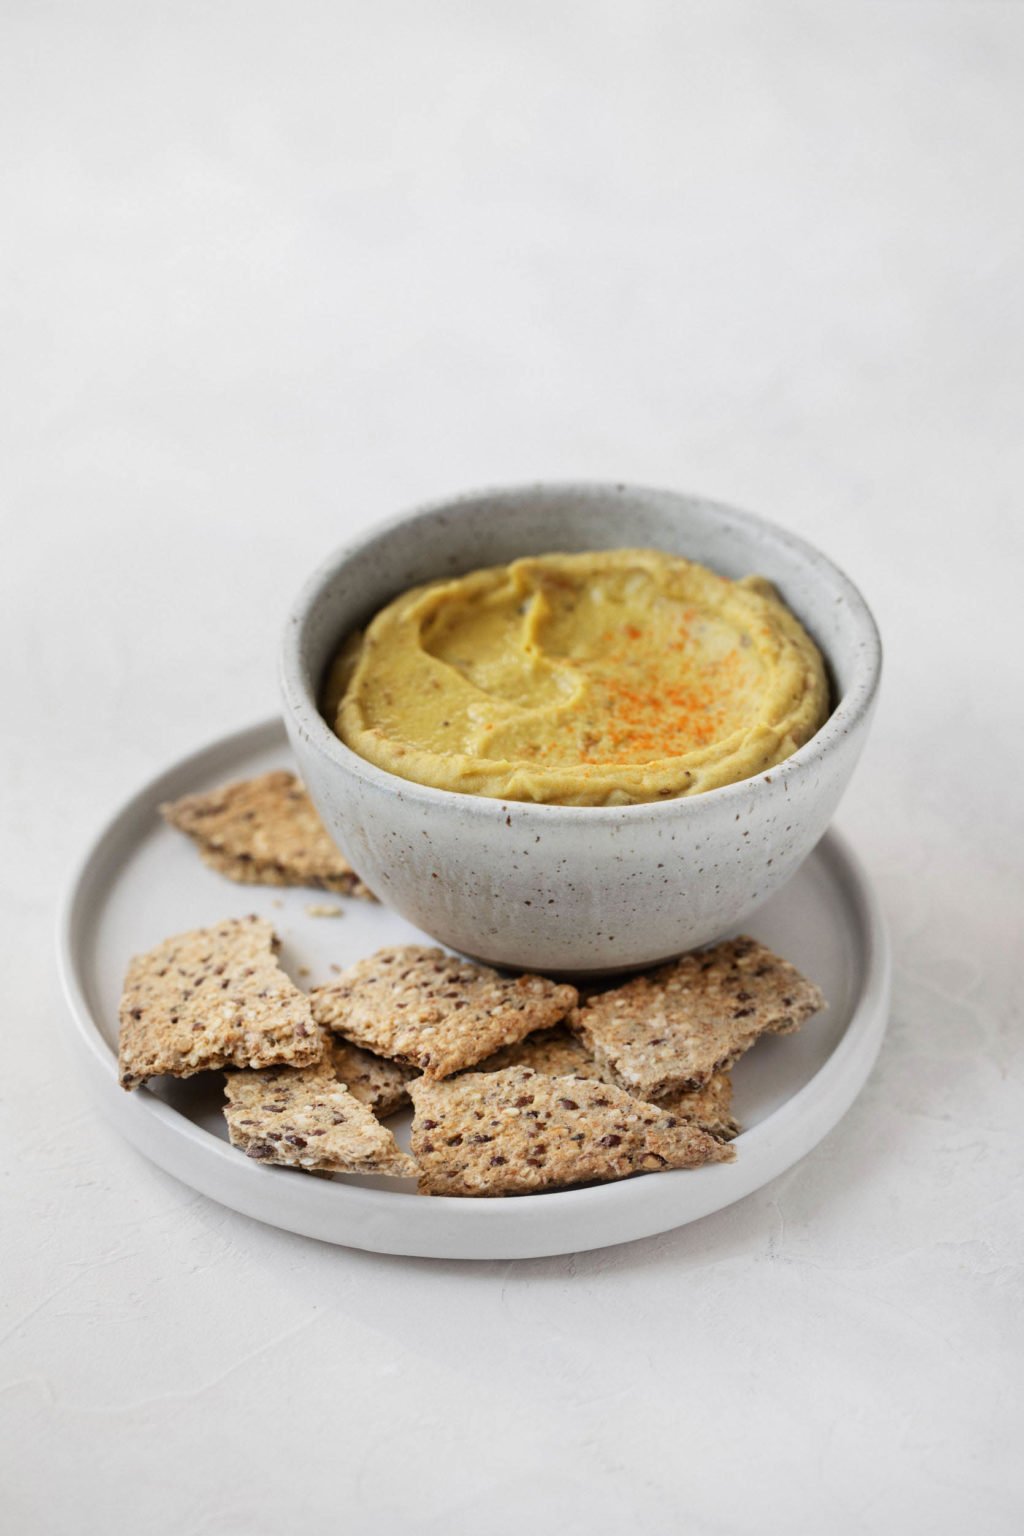 An angled image of a small appetizer plate with crackers and a dip. It rests on a white surface.